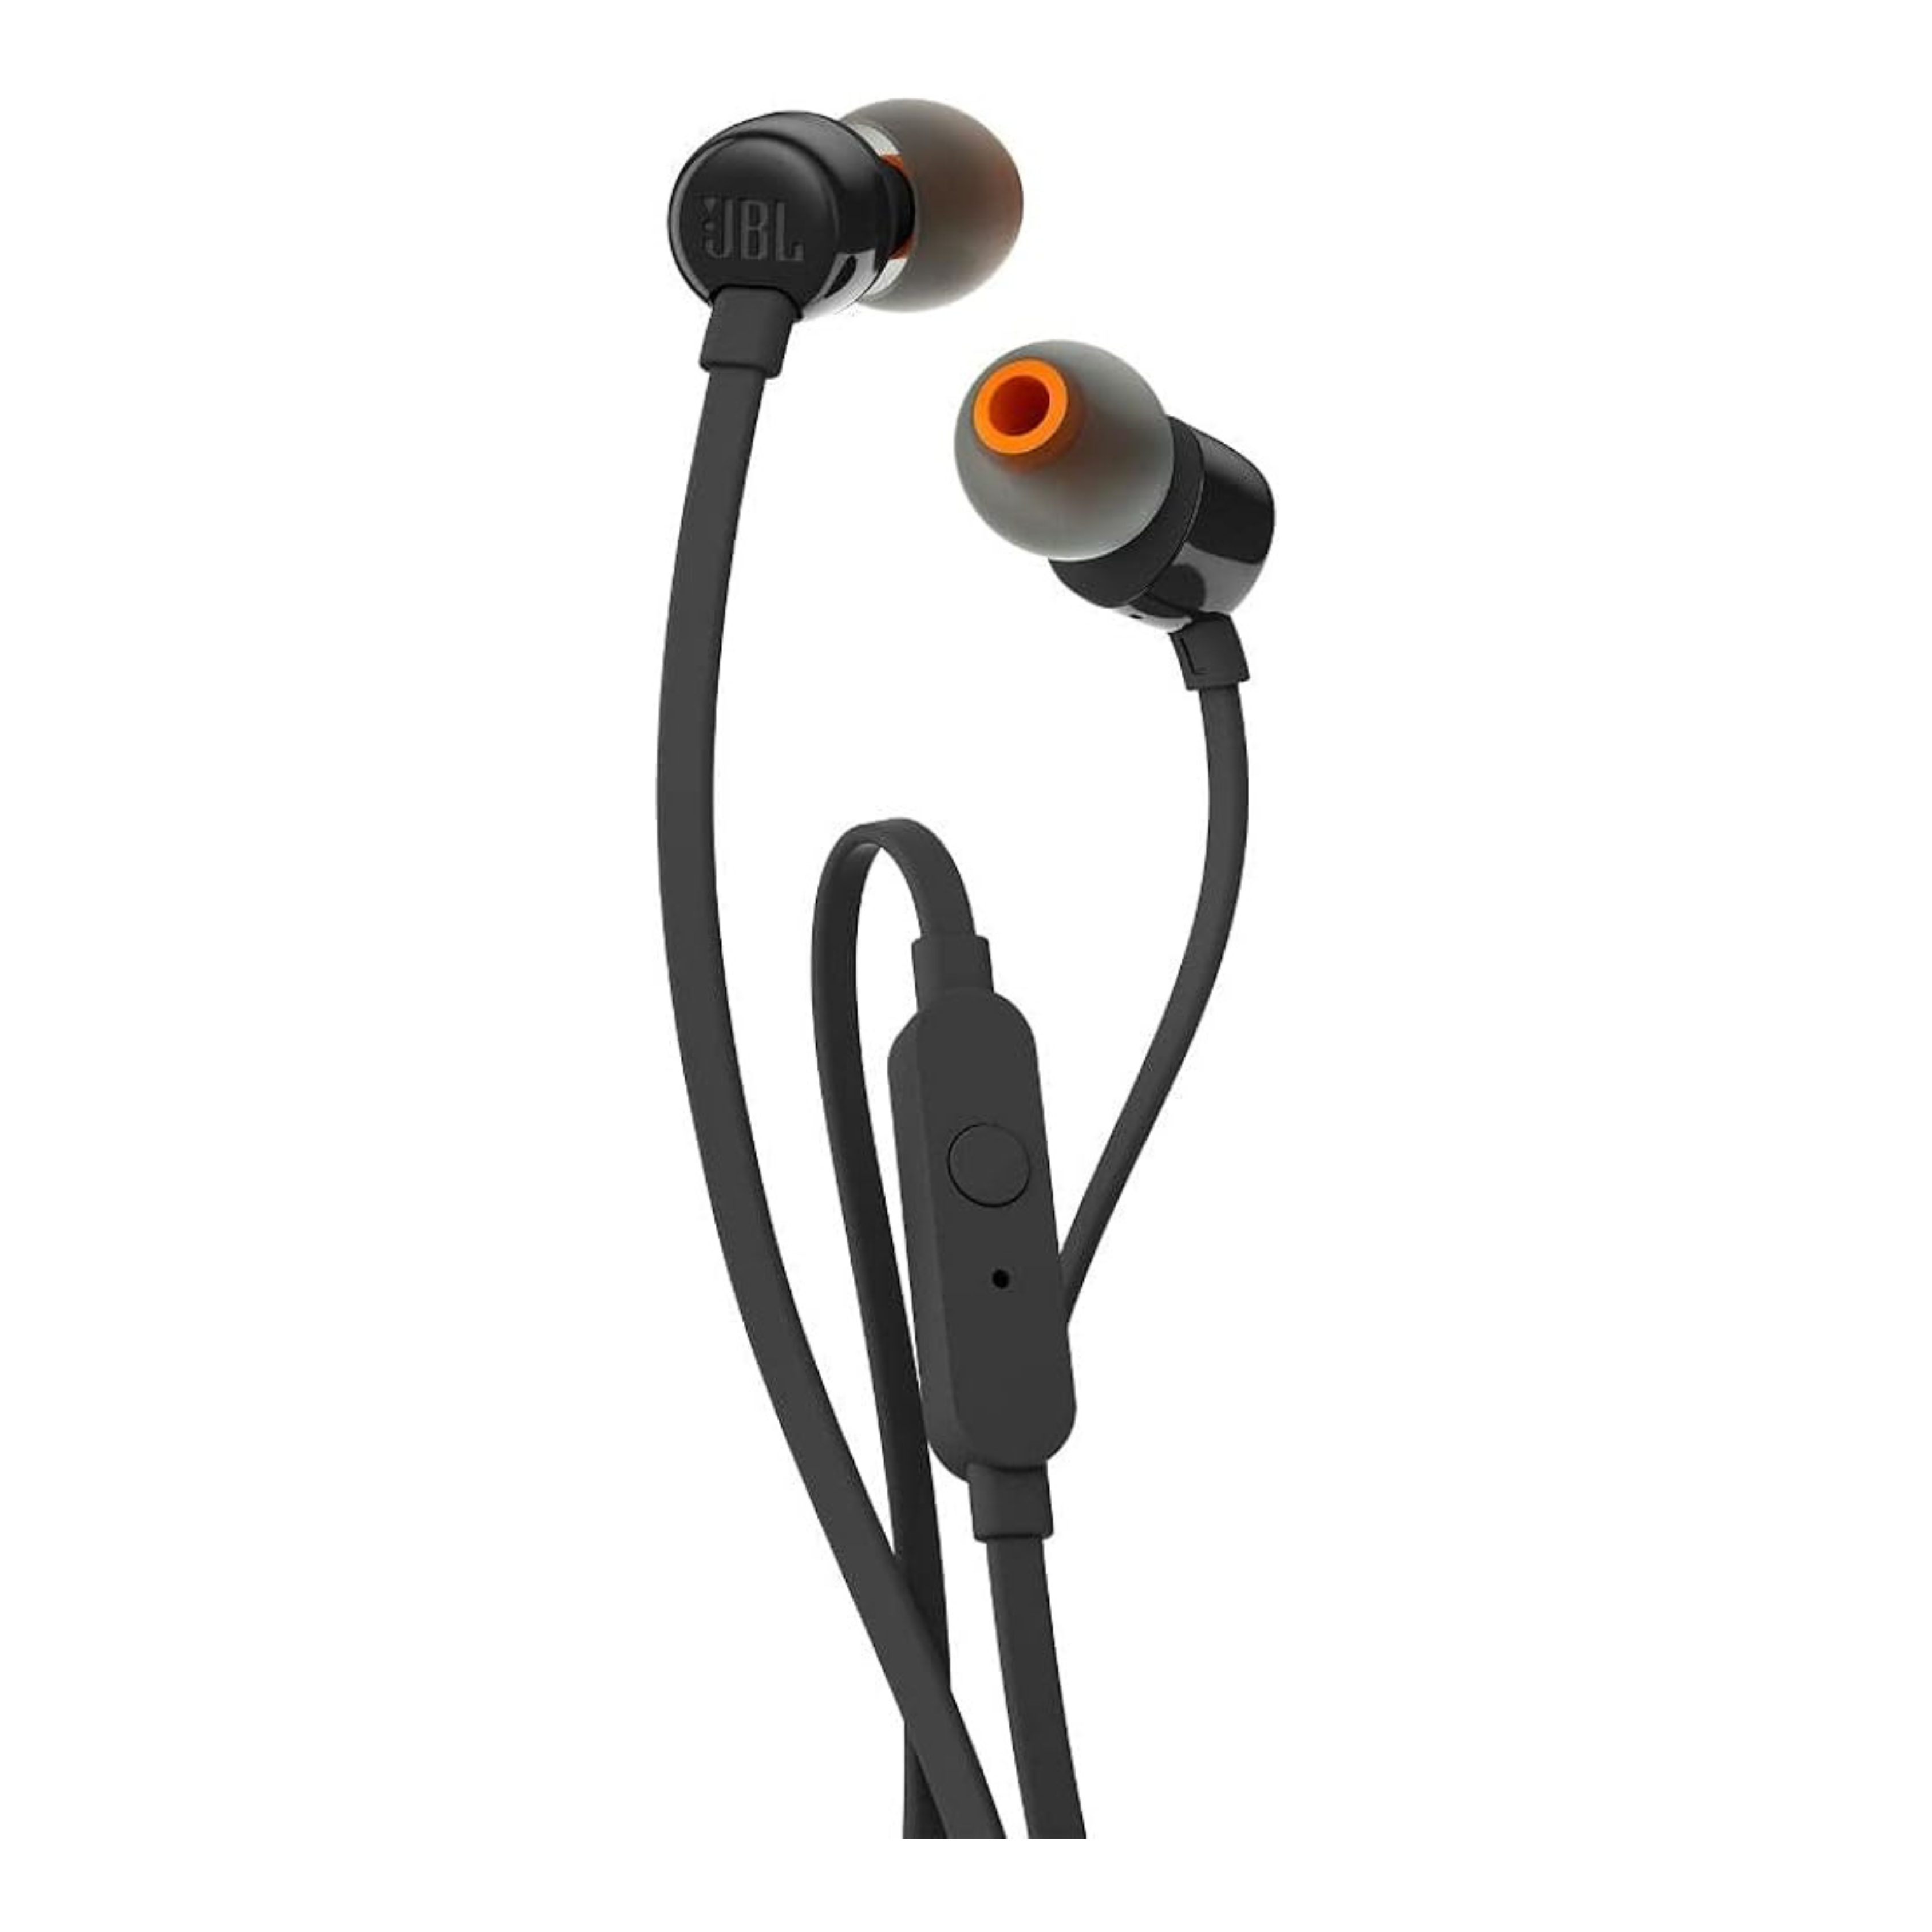 JBL Wired Universal In-Ear Headphone with Remote Control and Microphone - Black - JBLT110BLK